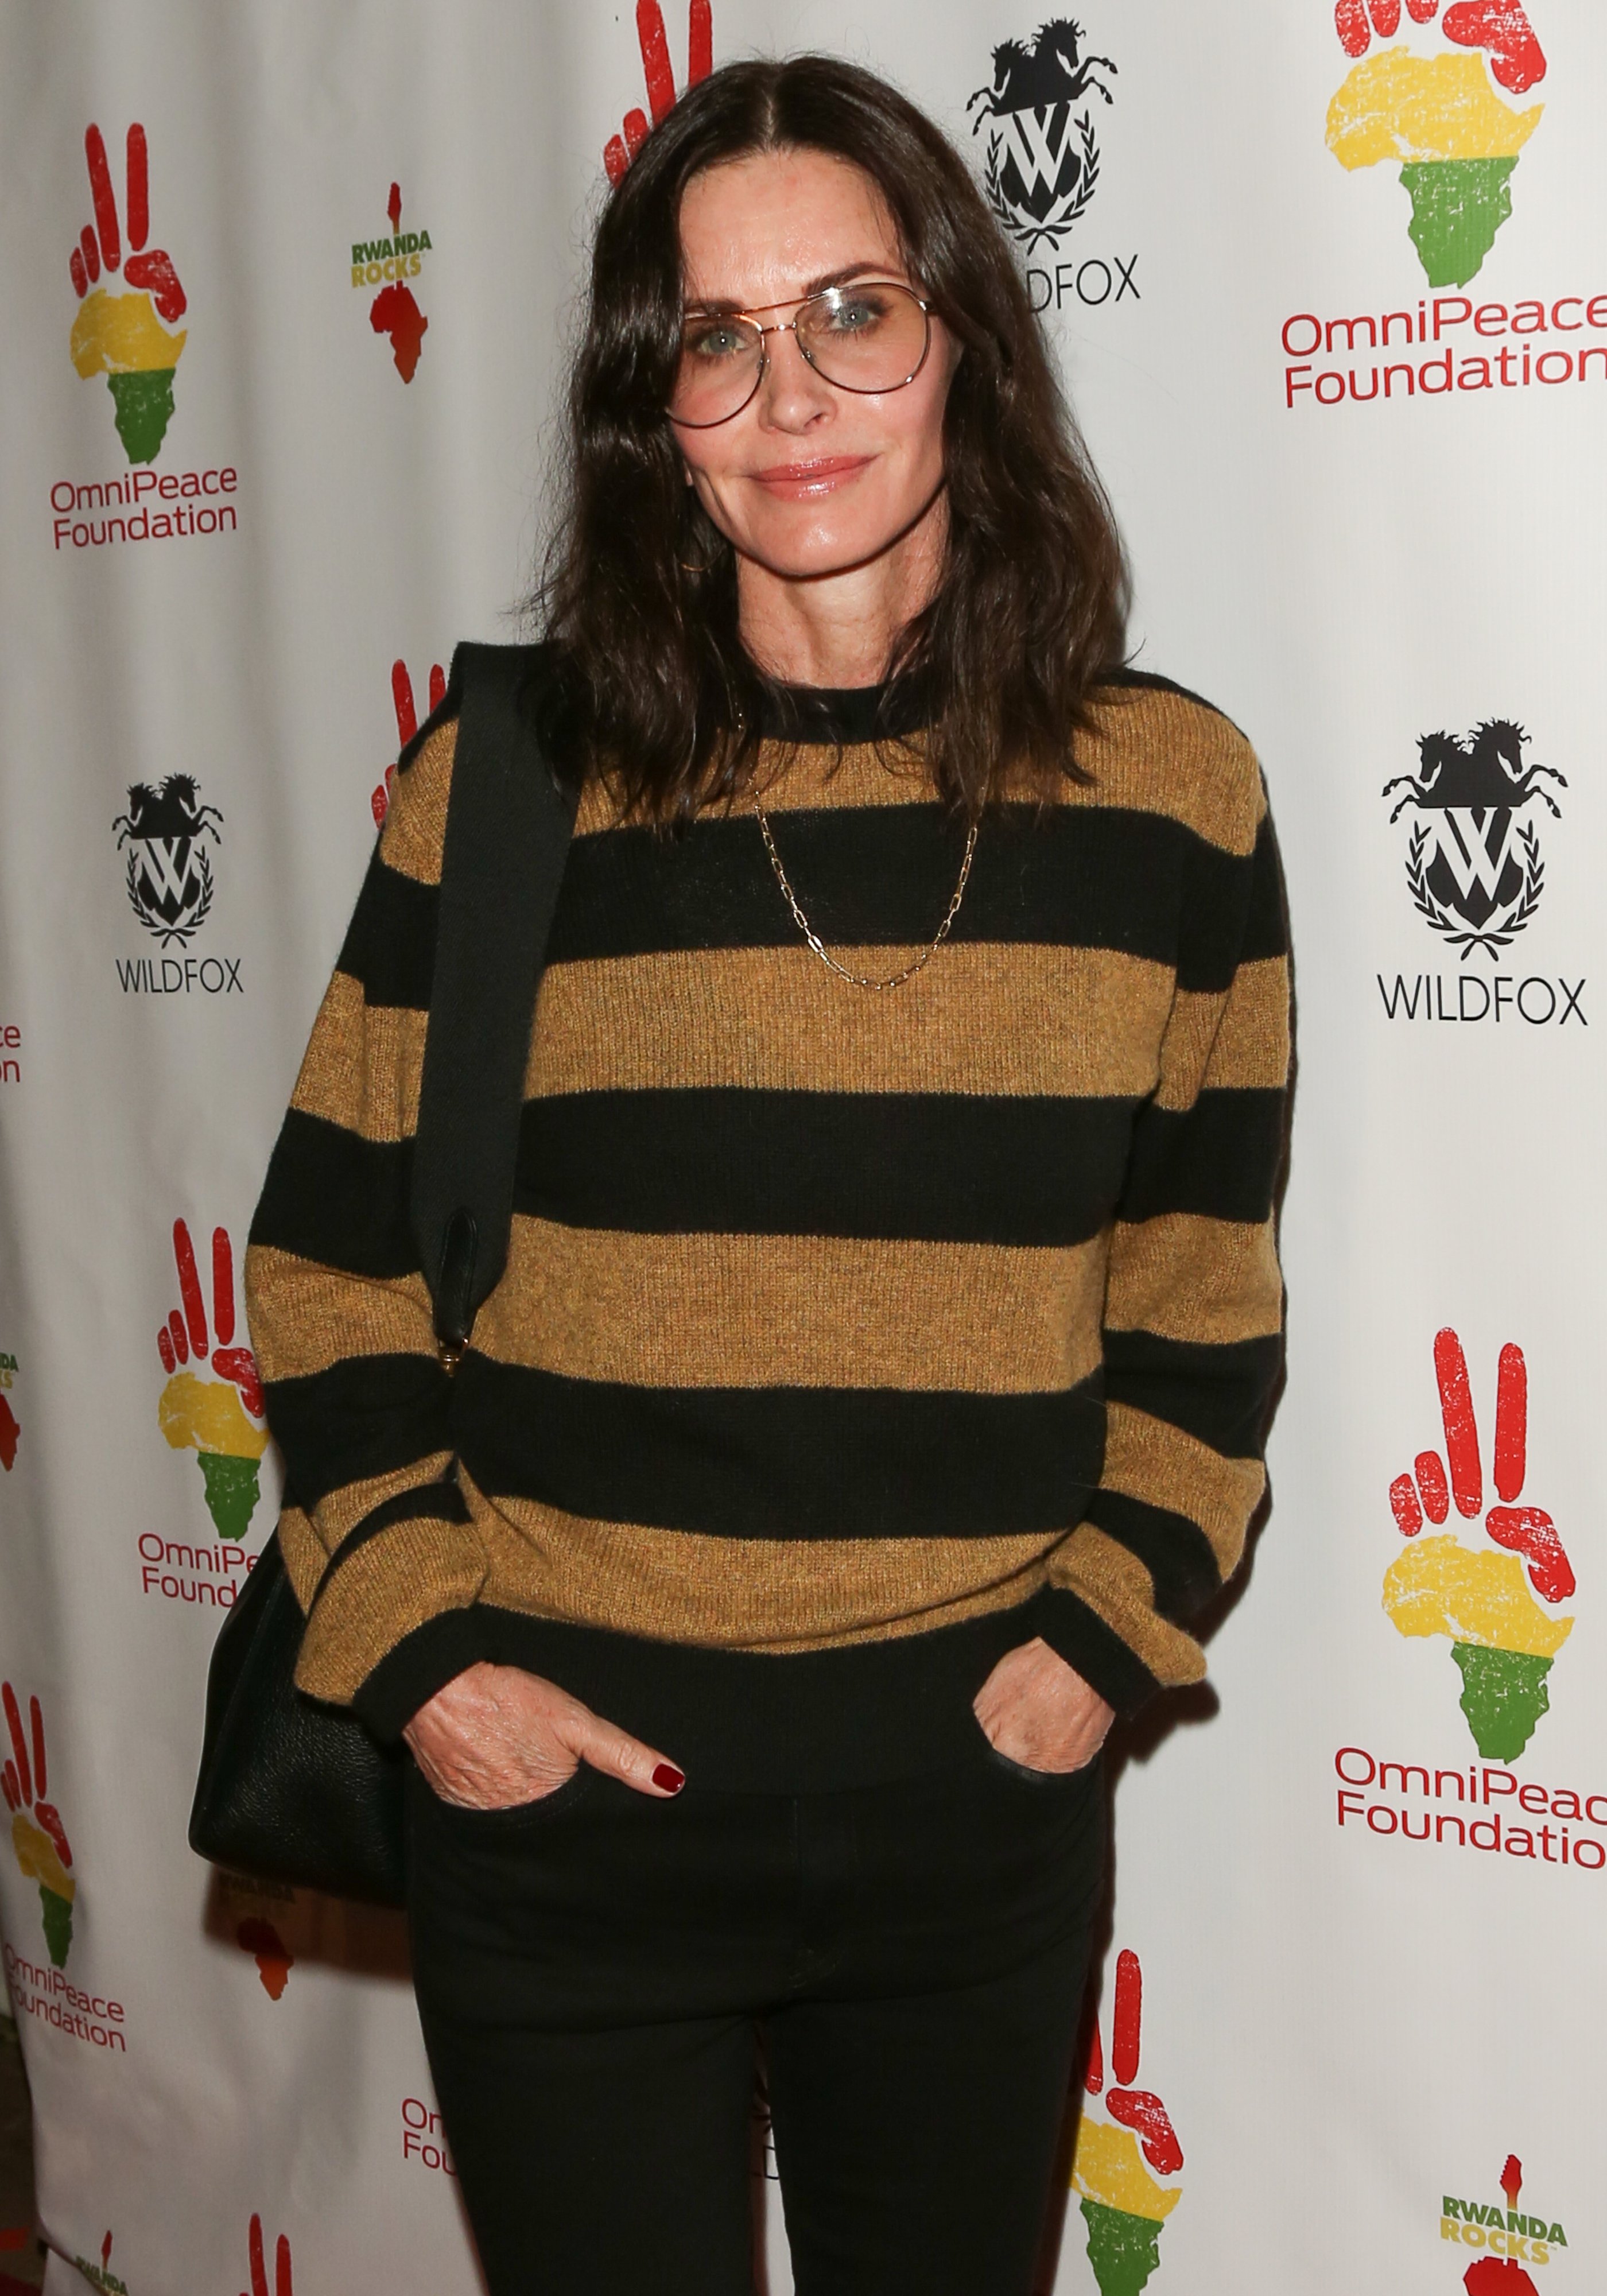 : Courteney Cox attends the 2nd Annual Gala "Rwanda Rocks" Charity Event at Vibrato Jazz Grill on November 04, 2019| Photo: Getty Images